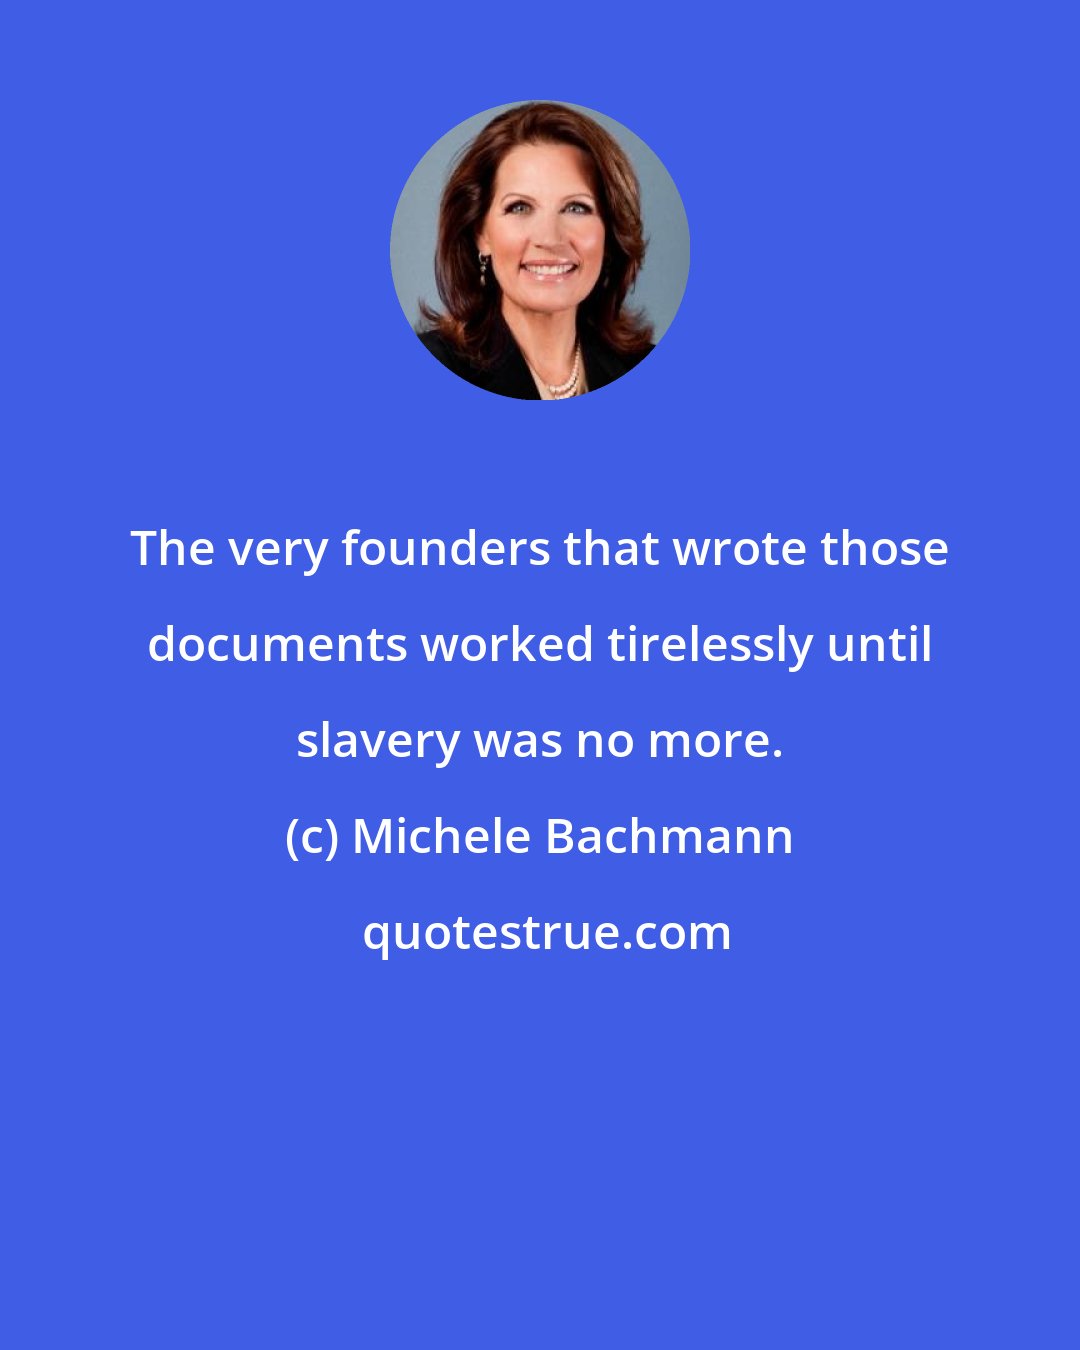 Michele Bachmann: The very founders that wrote those documents worked tirelessly until slavery was no more.